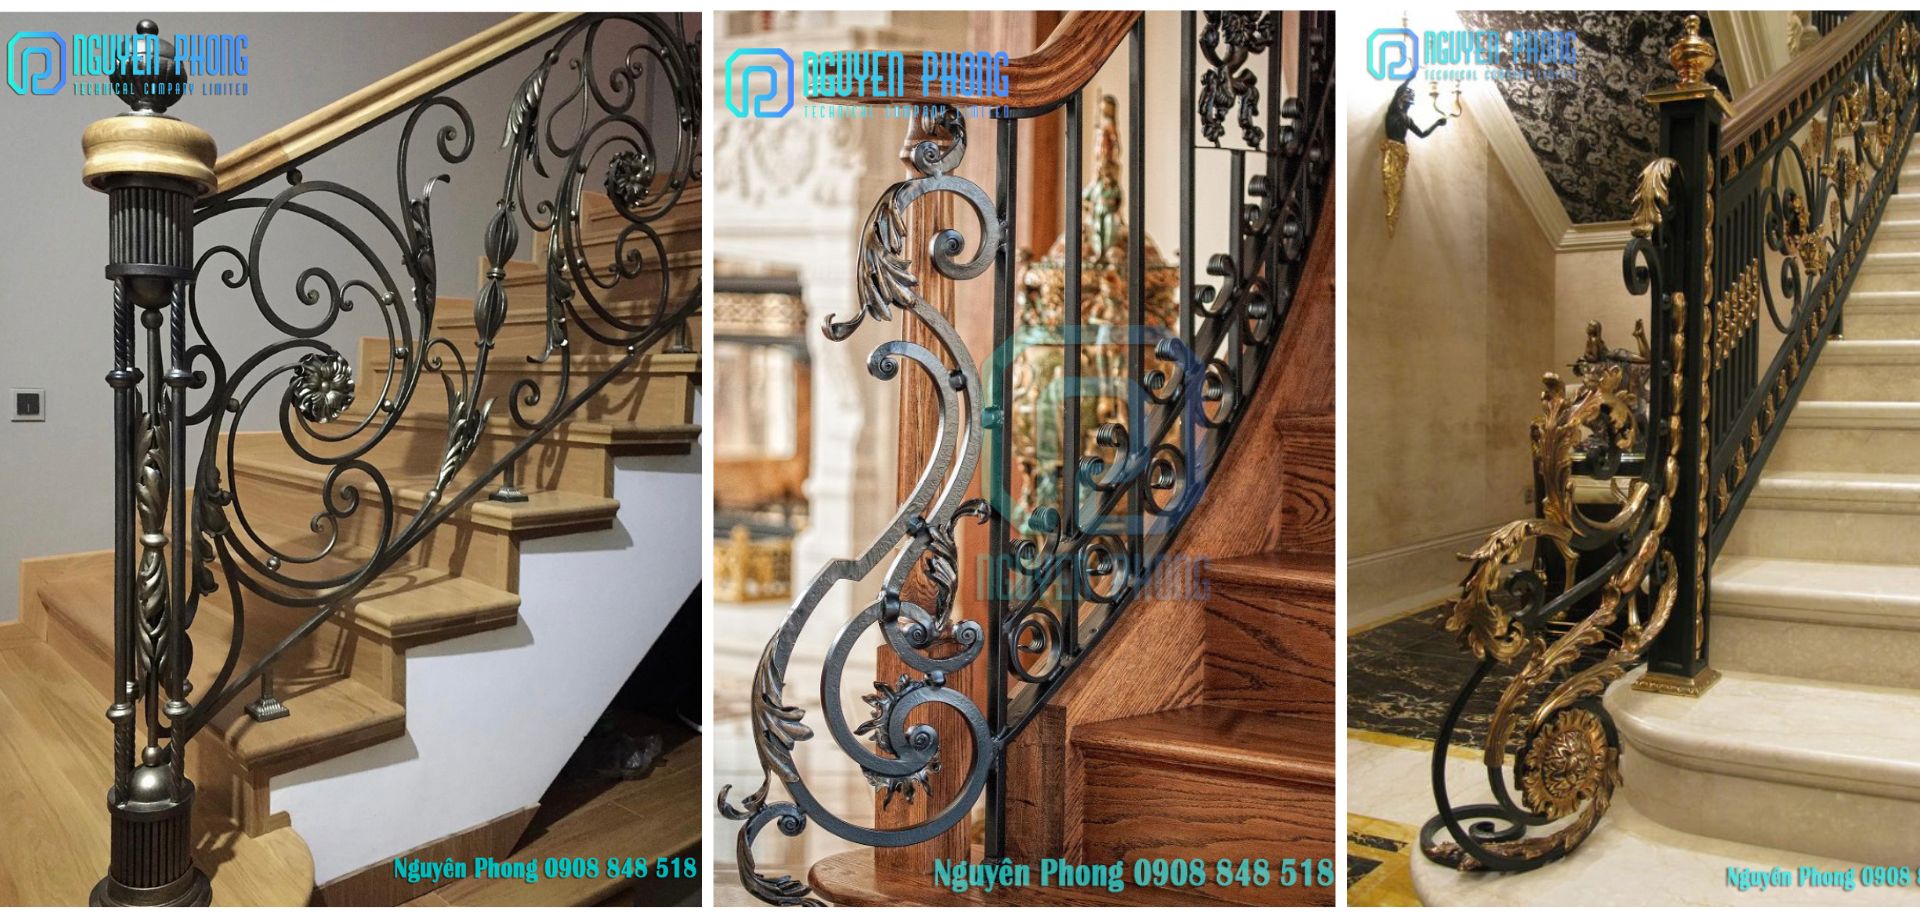 https://nguyenphongcnc.com/assets/images/gallery/wrought-iron-stair-railing-stairs-railing-design-staircase-93.jpg